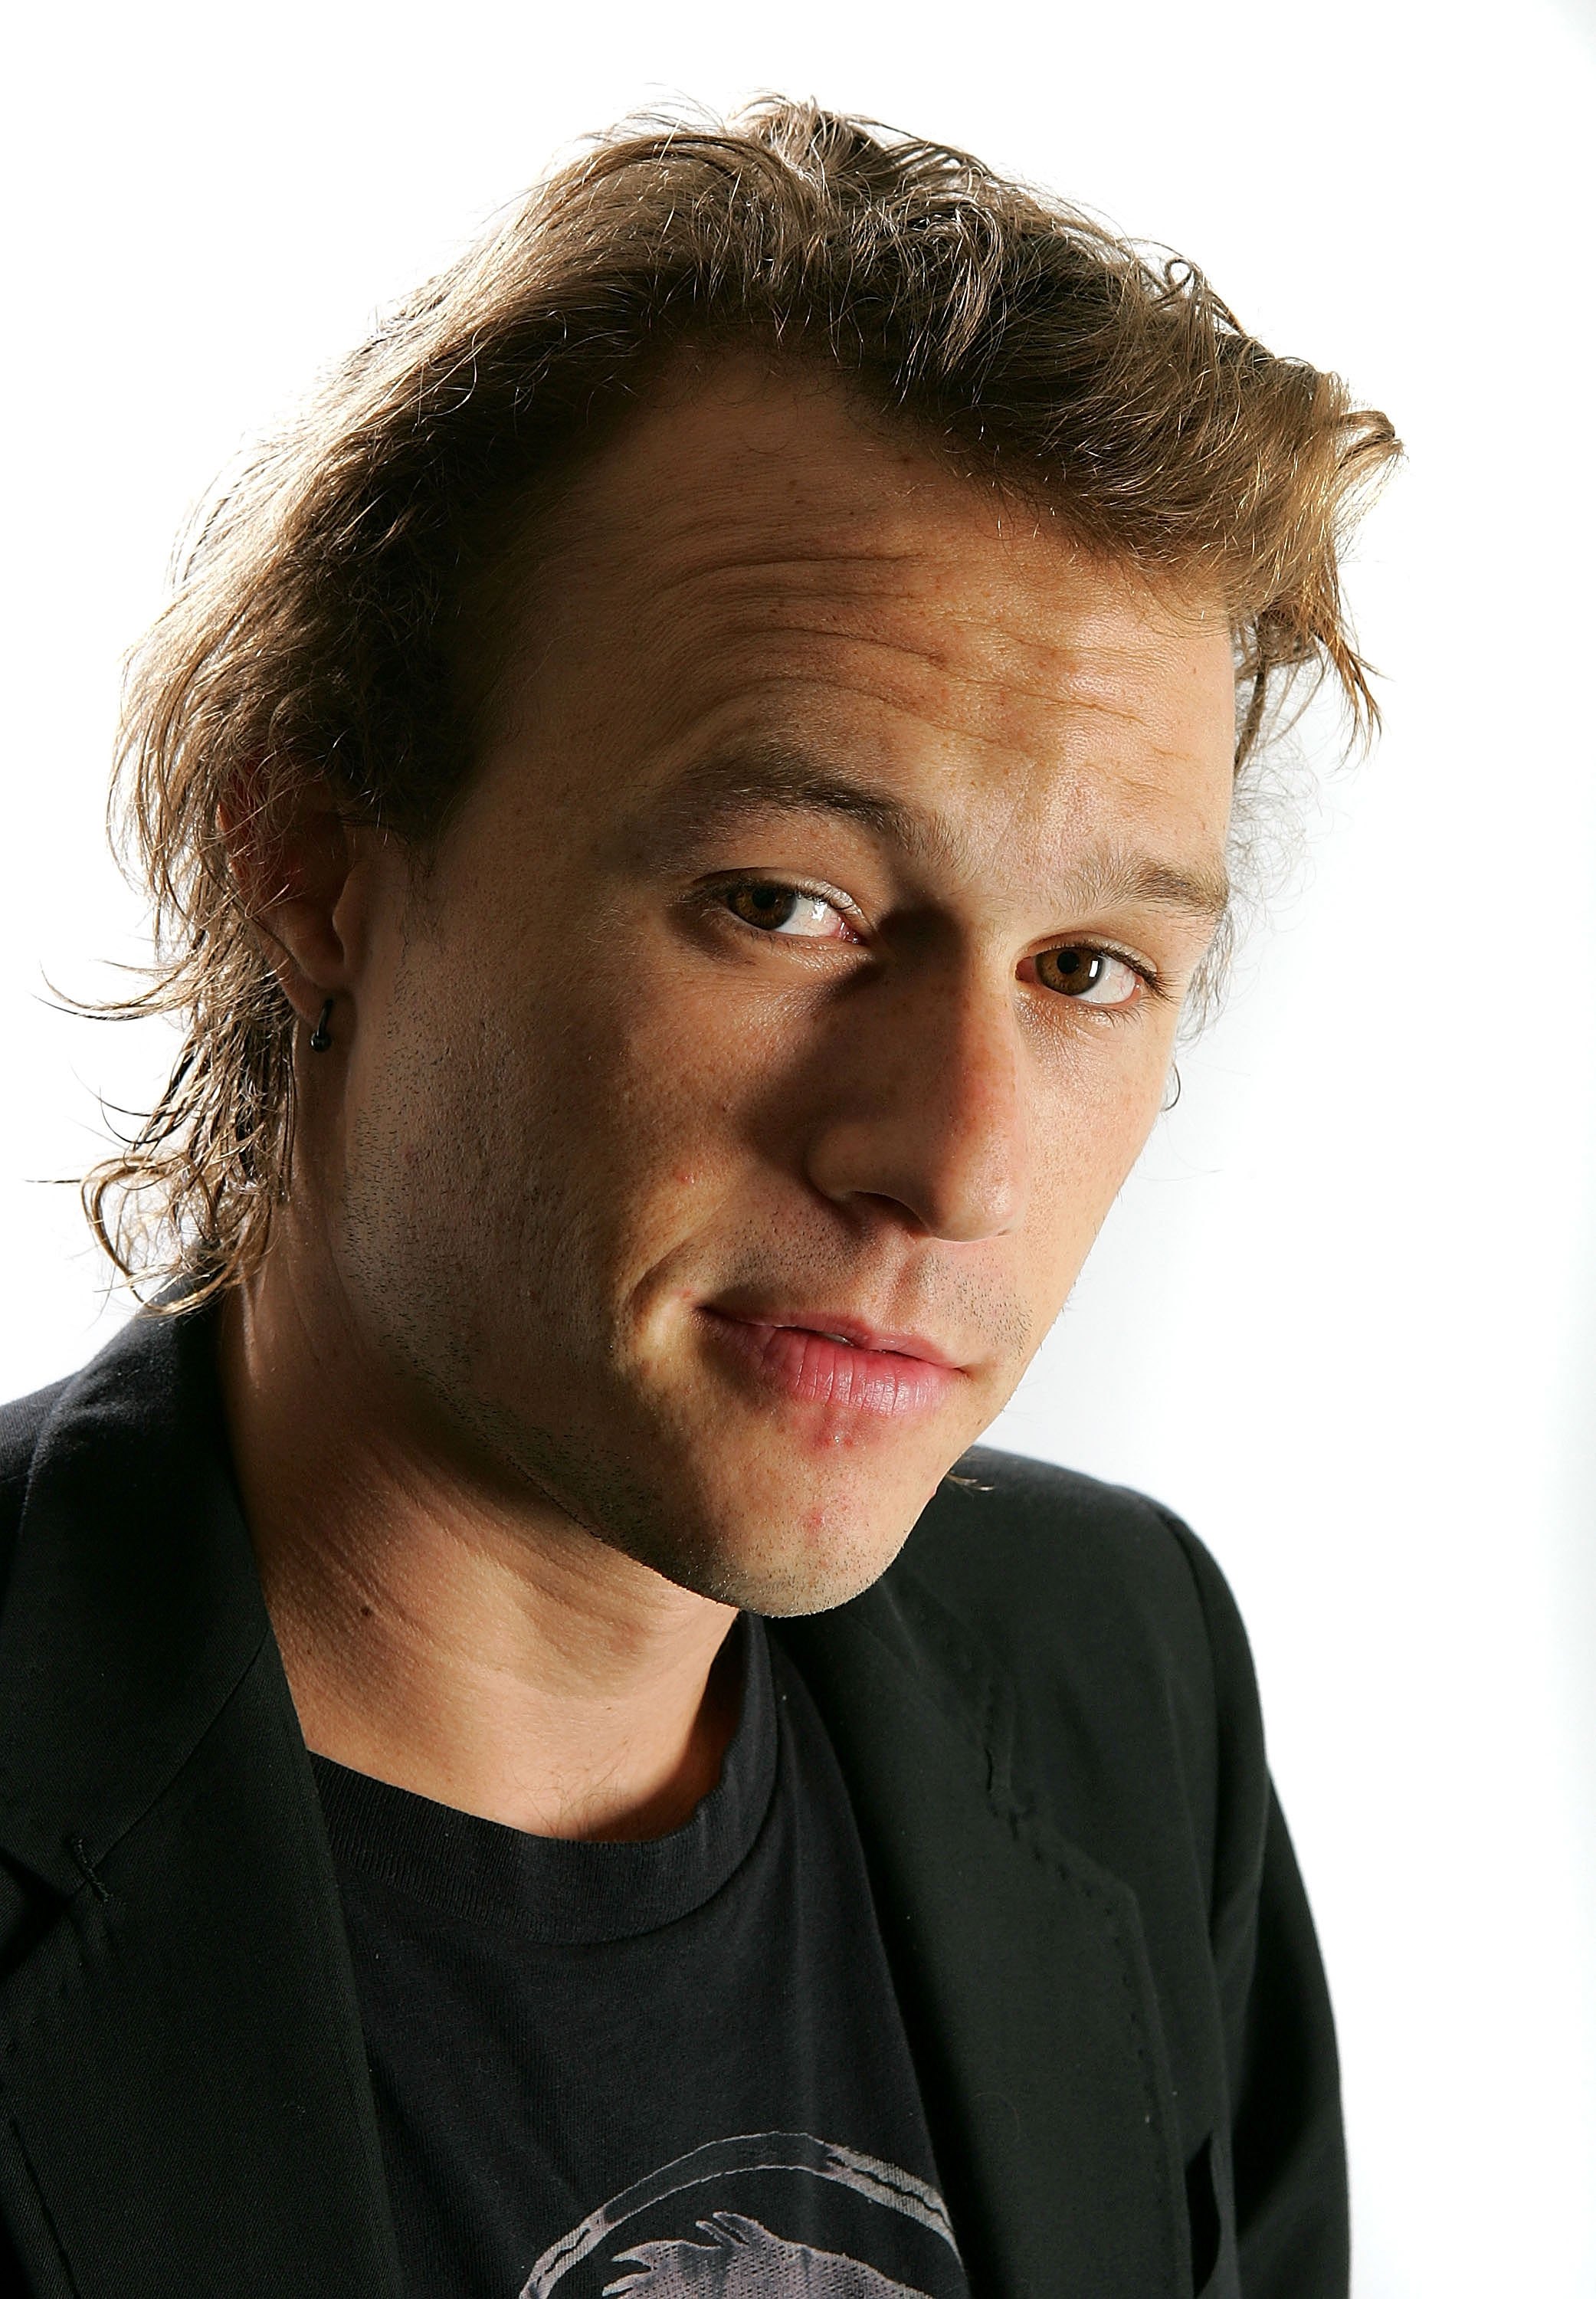 Heath Ledger during a portrait session in Toronto, Canada on September 8, 2006 | Source: Getty Images